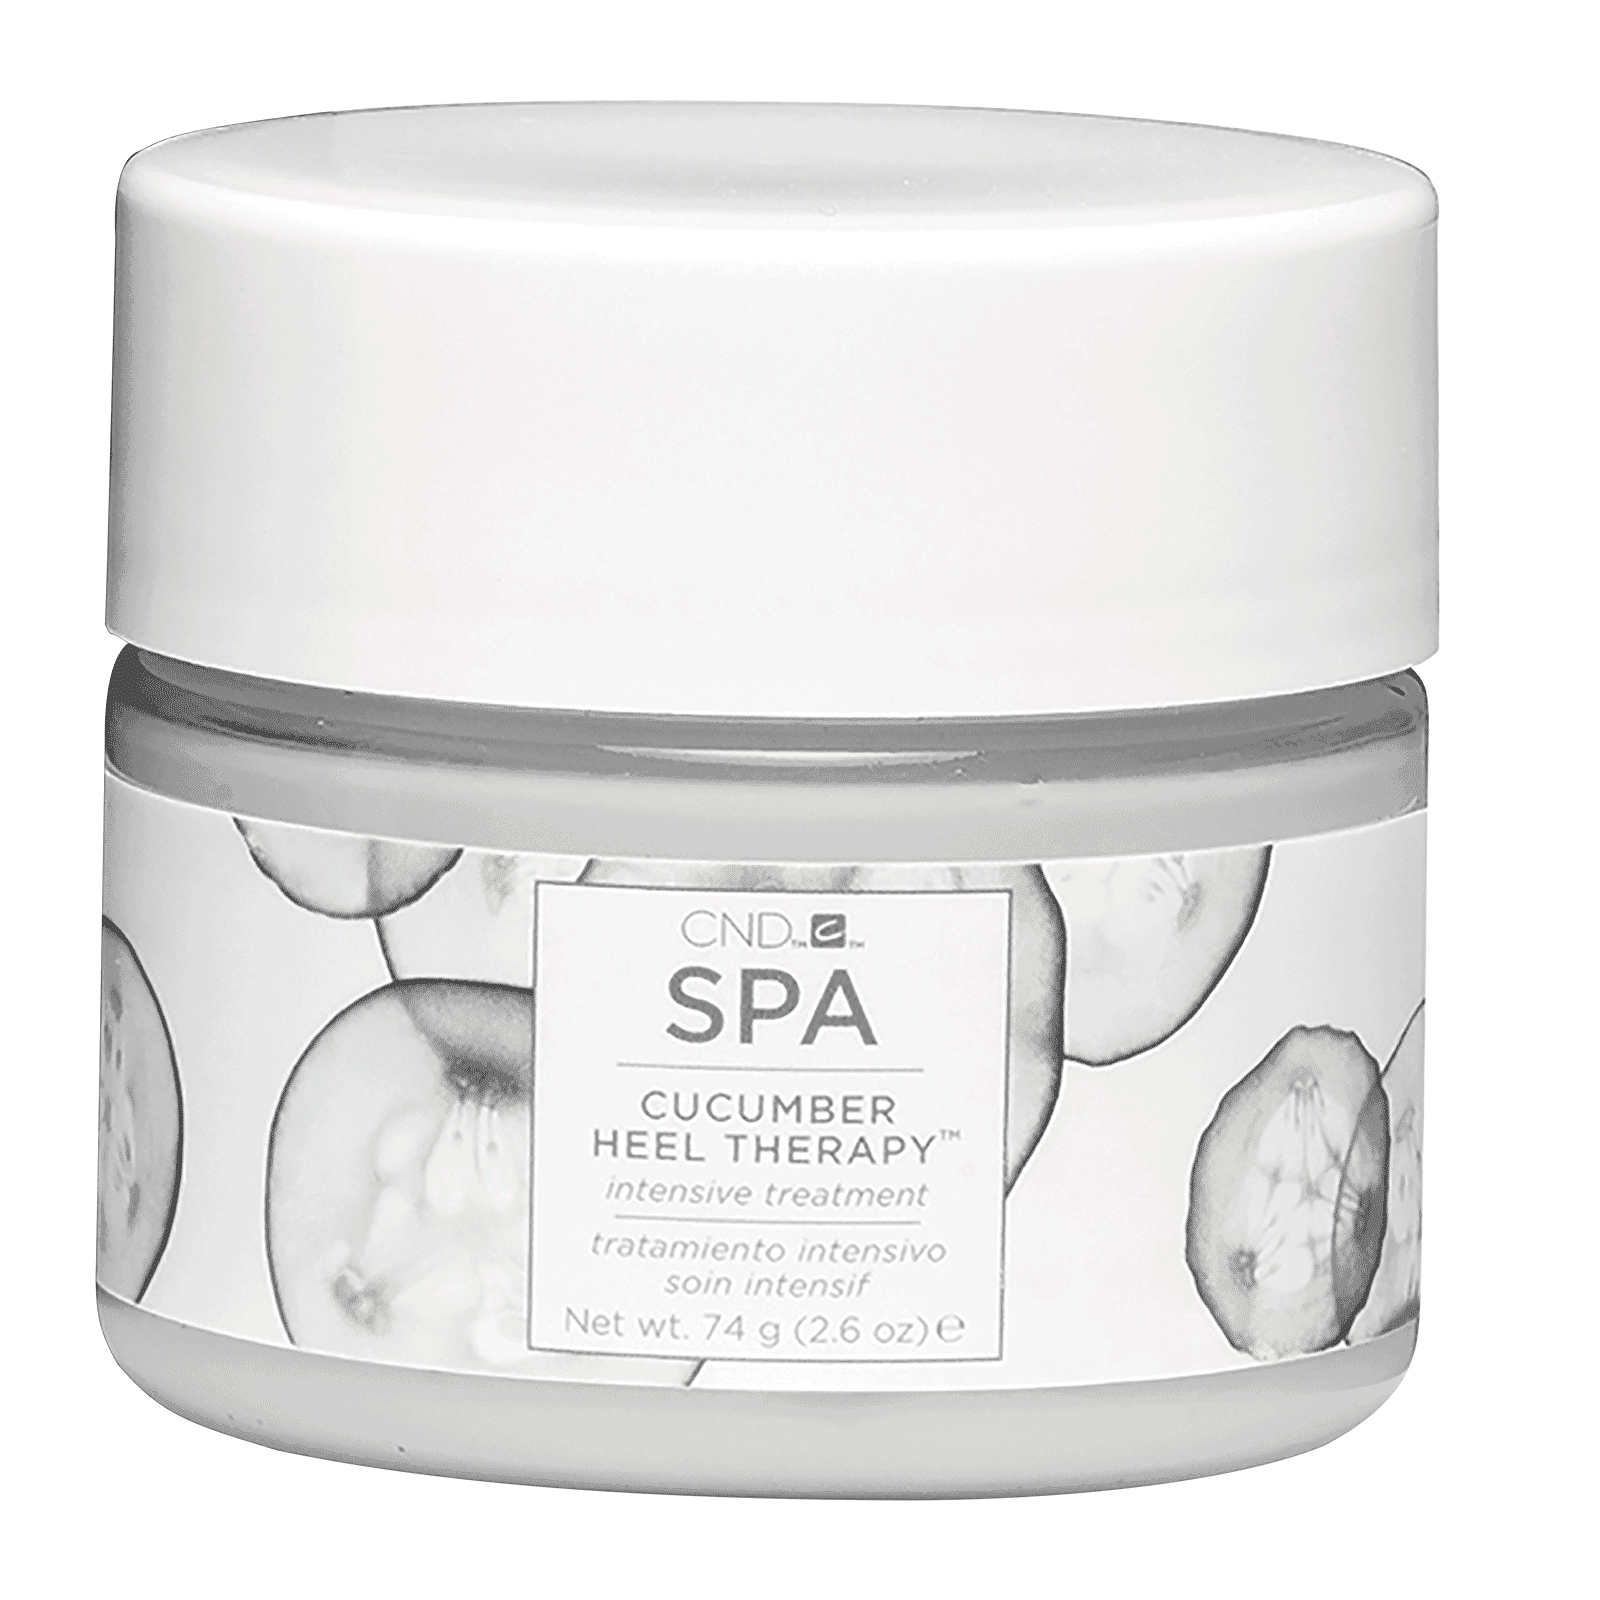 Spa Cucumber Heel Therapy - CND | CosmoProf